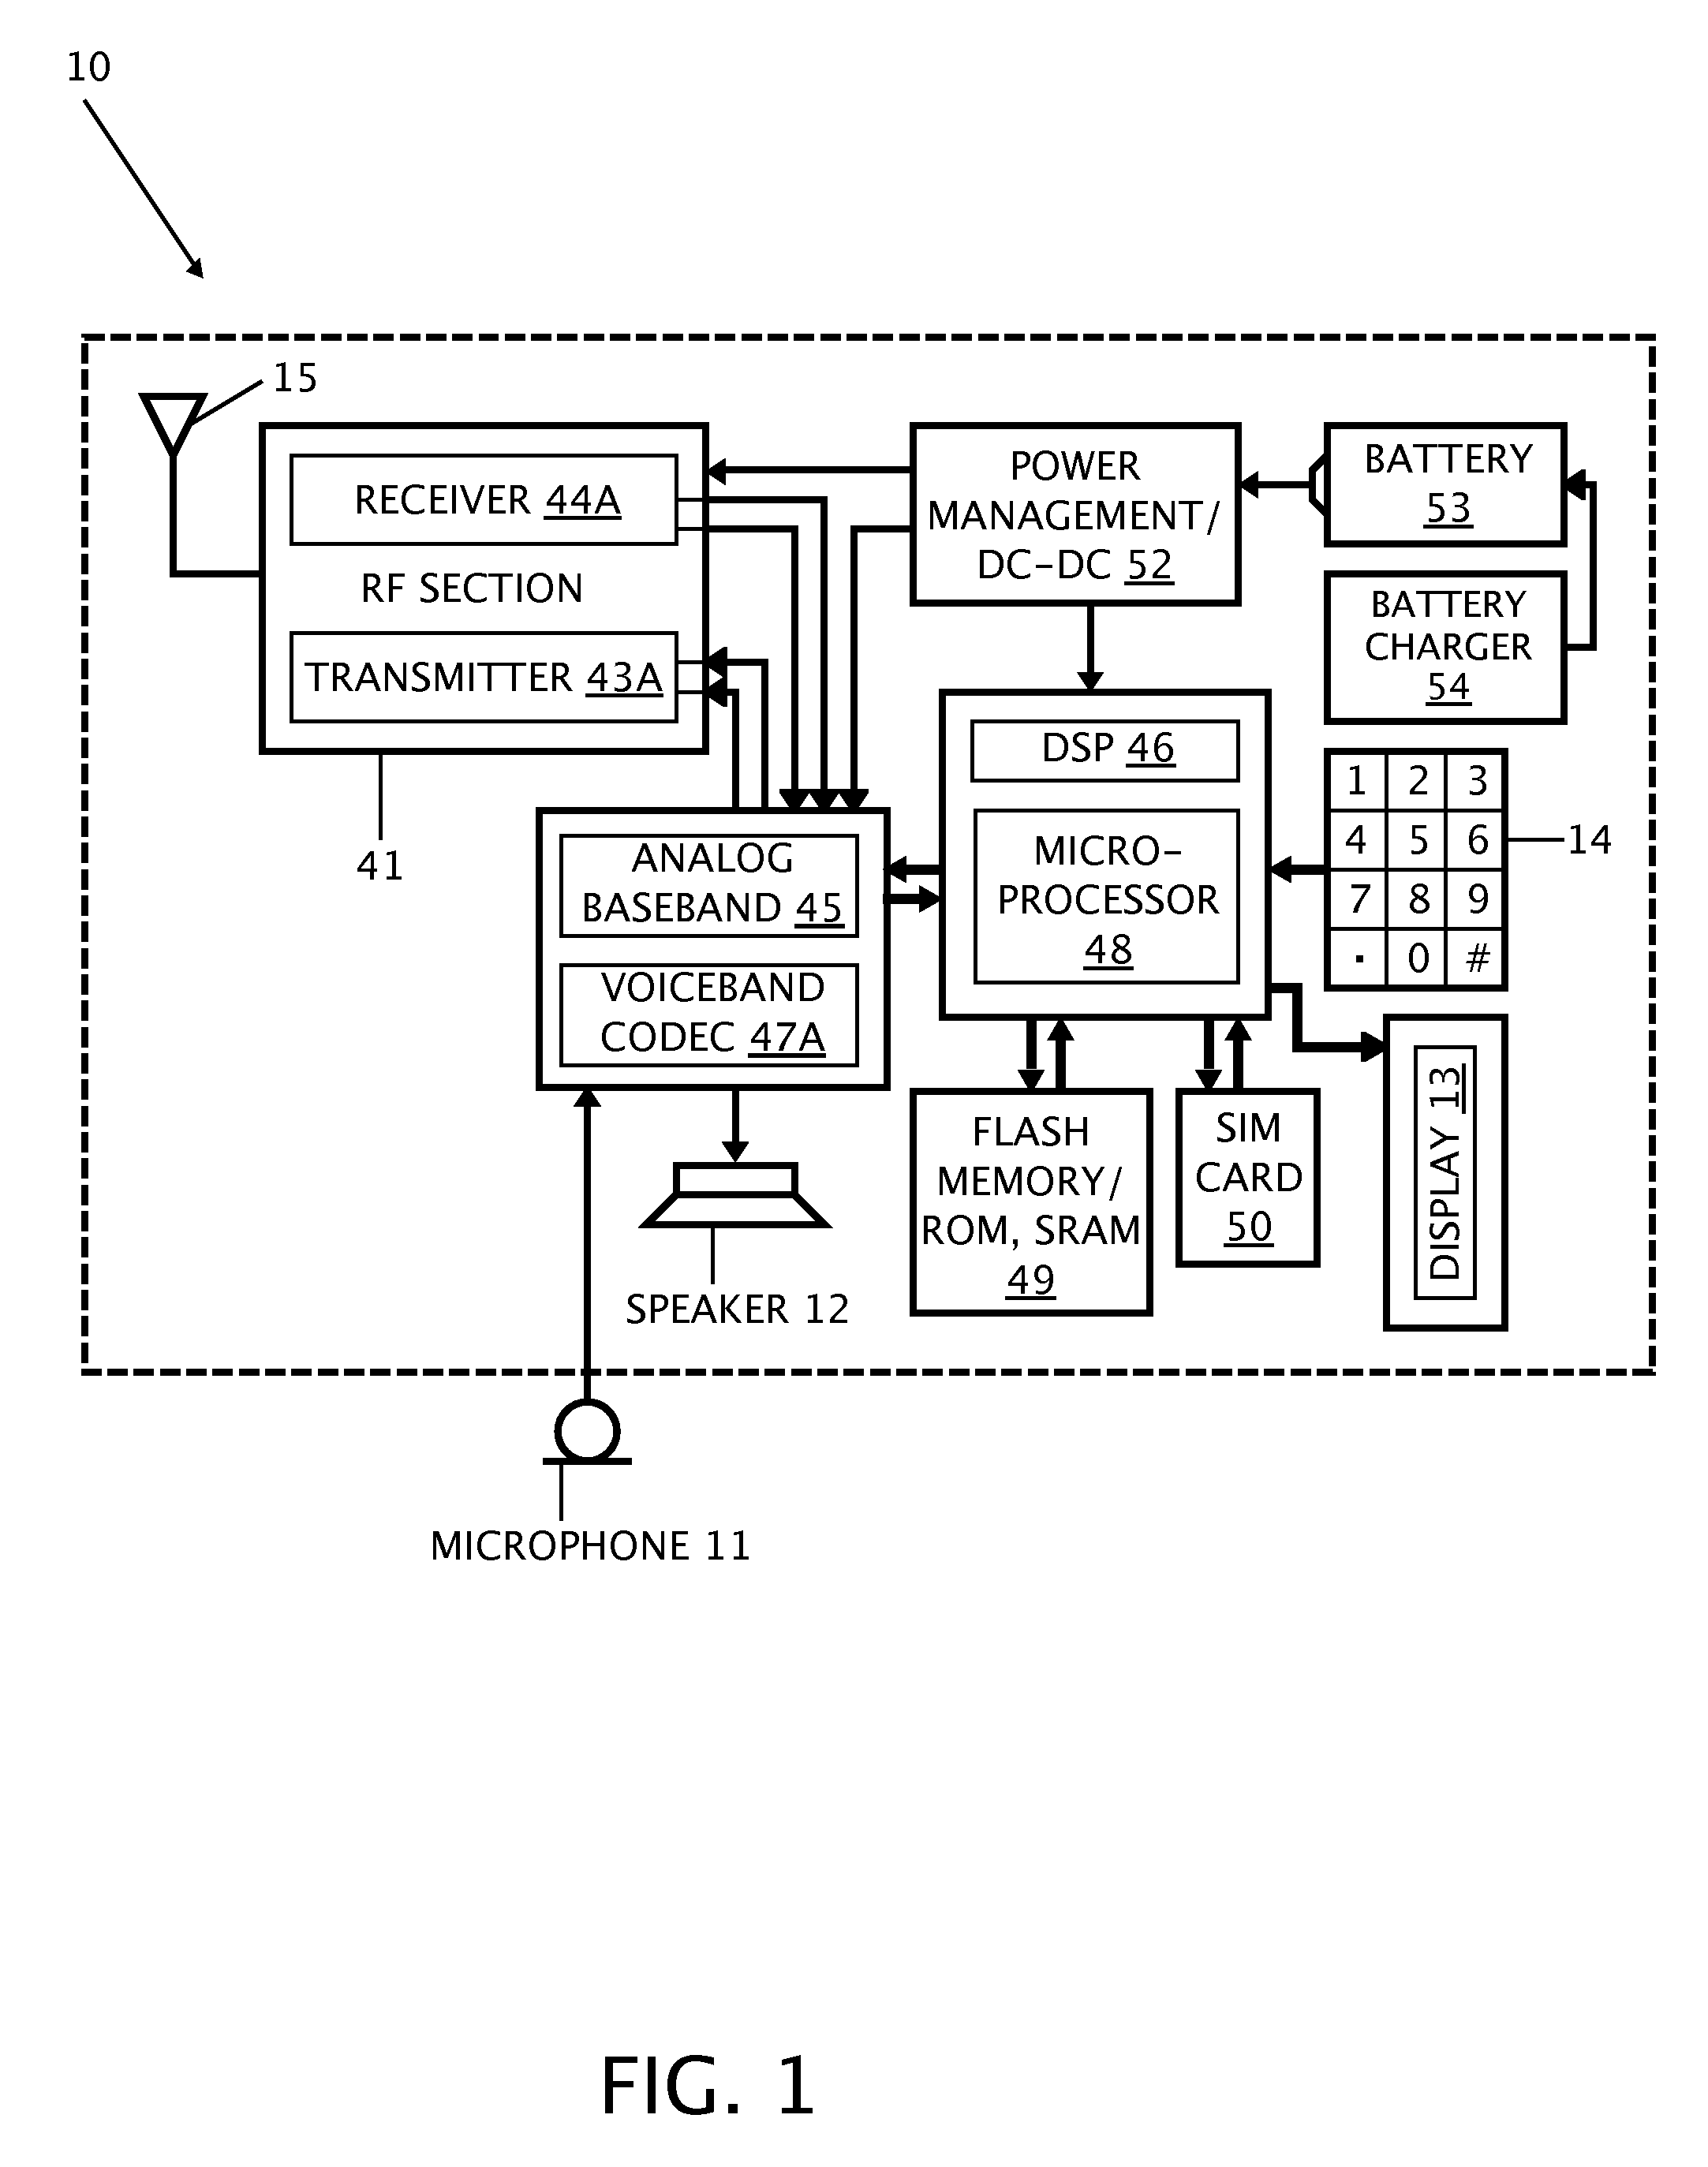 Voice coder with two microphone system and strategic microphone placement to deter obstruction for a digital communication device